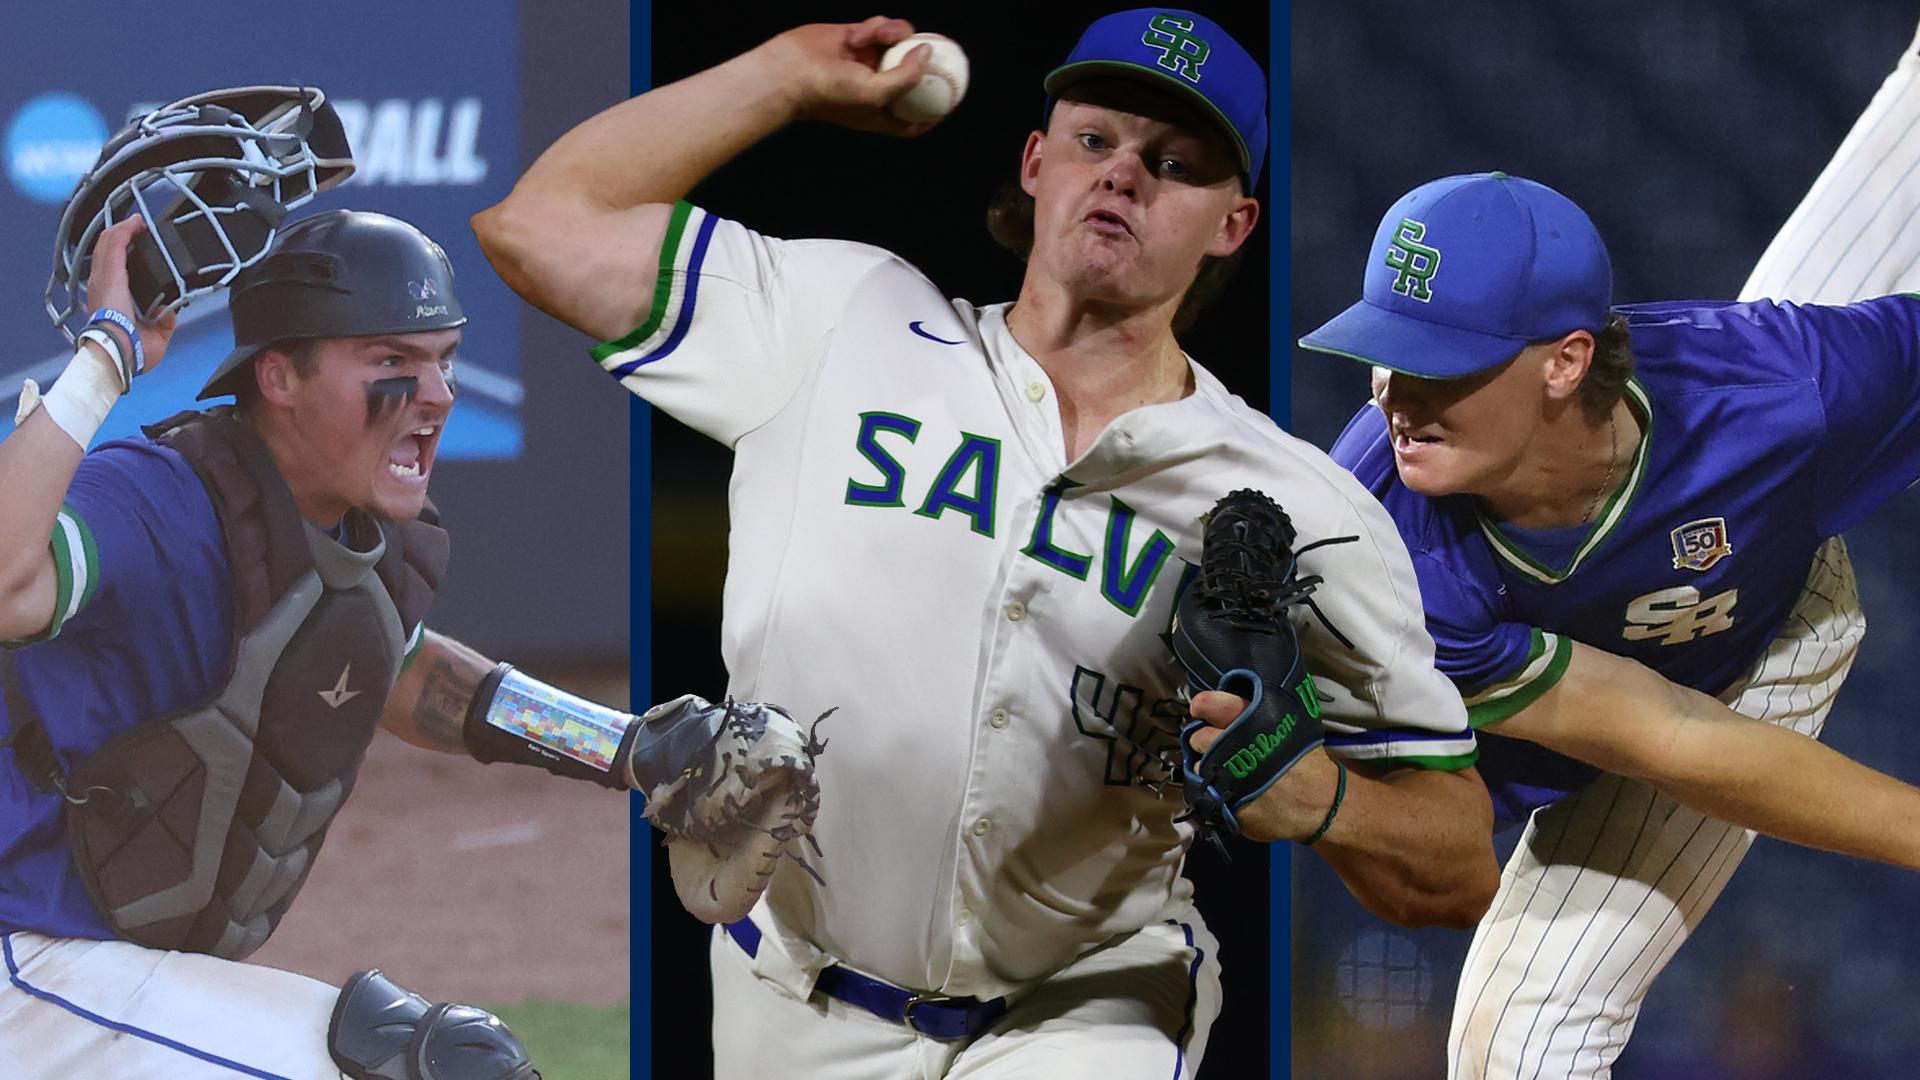 Seahawks on the Division III College World Series All-Tournament Teams (l to r): Brady Smolinski, Sean Mulligan, Kyle Carozza. (All images courtesy of Ryan Coleman of D3PHOTOGRAPHY.COM)